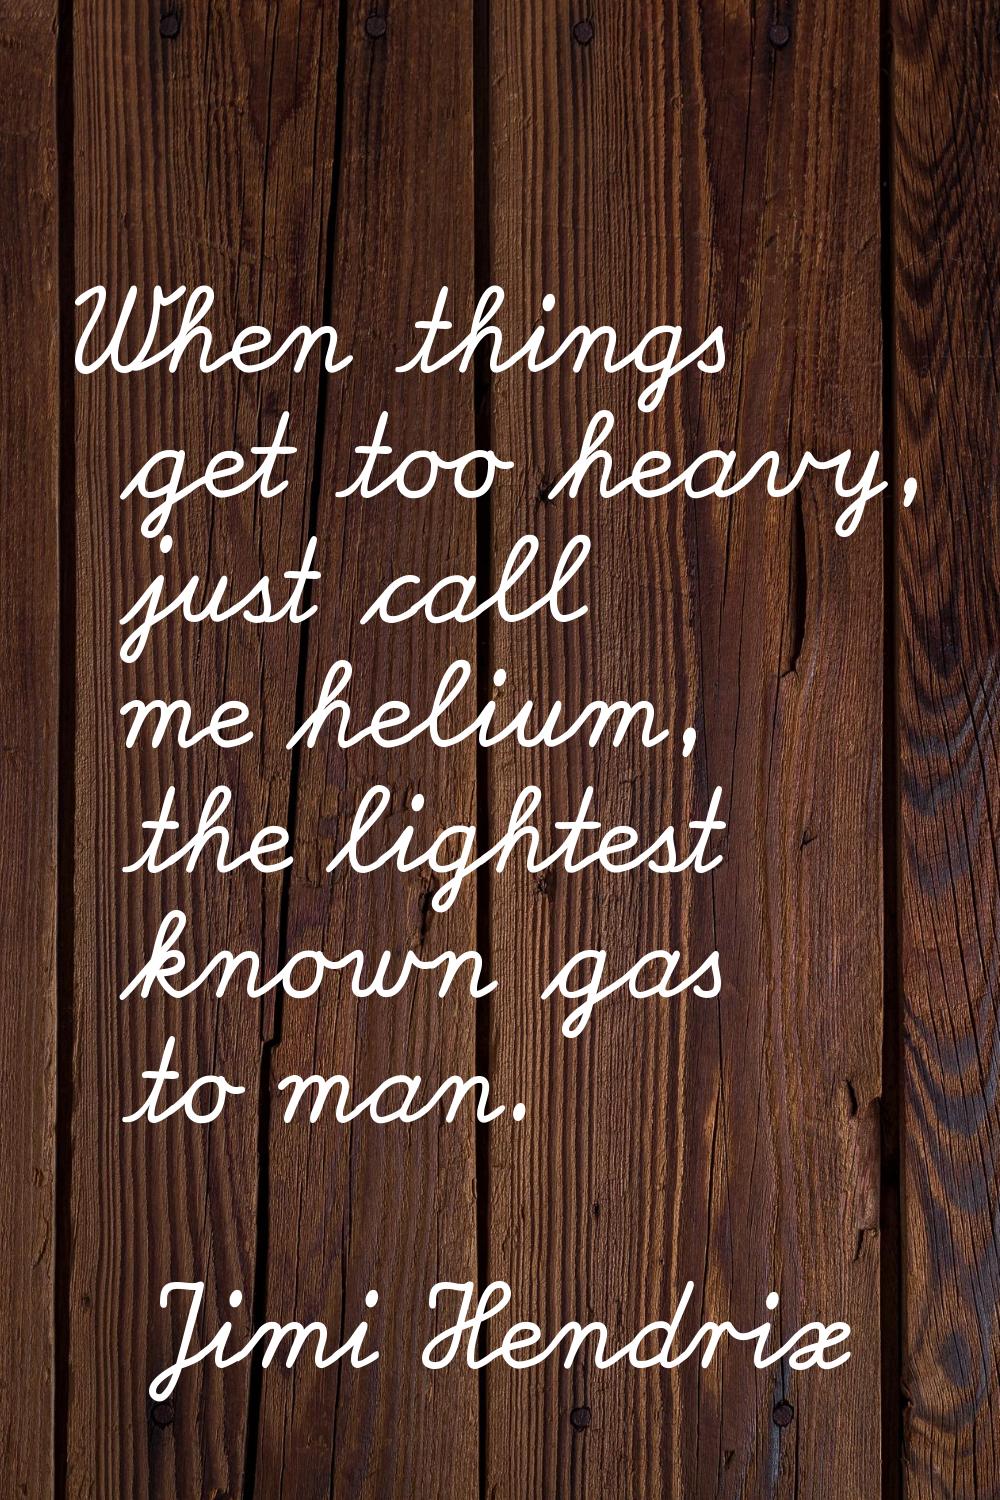 When things get too heavy, just call me helium, the lightest known gas to man.